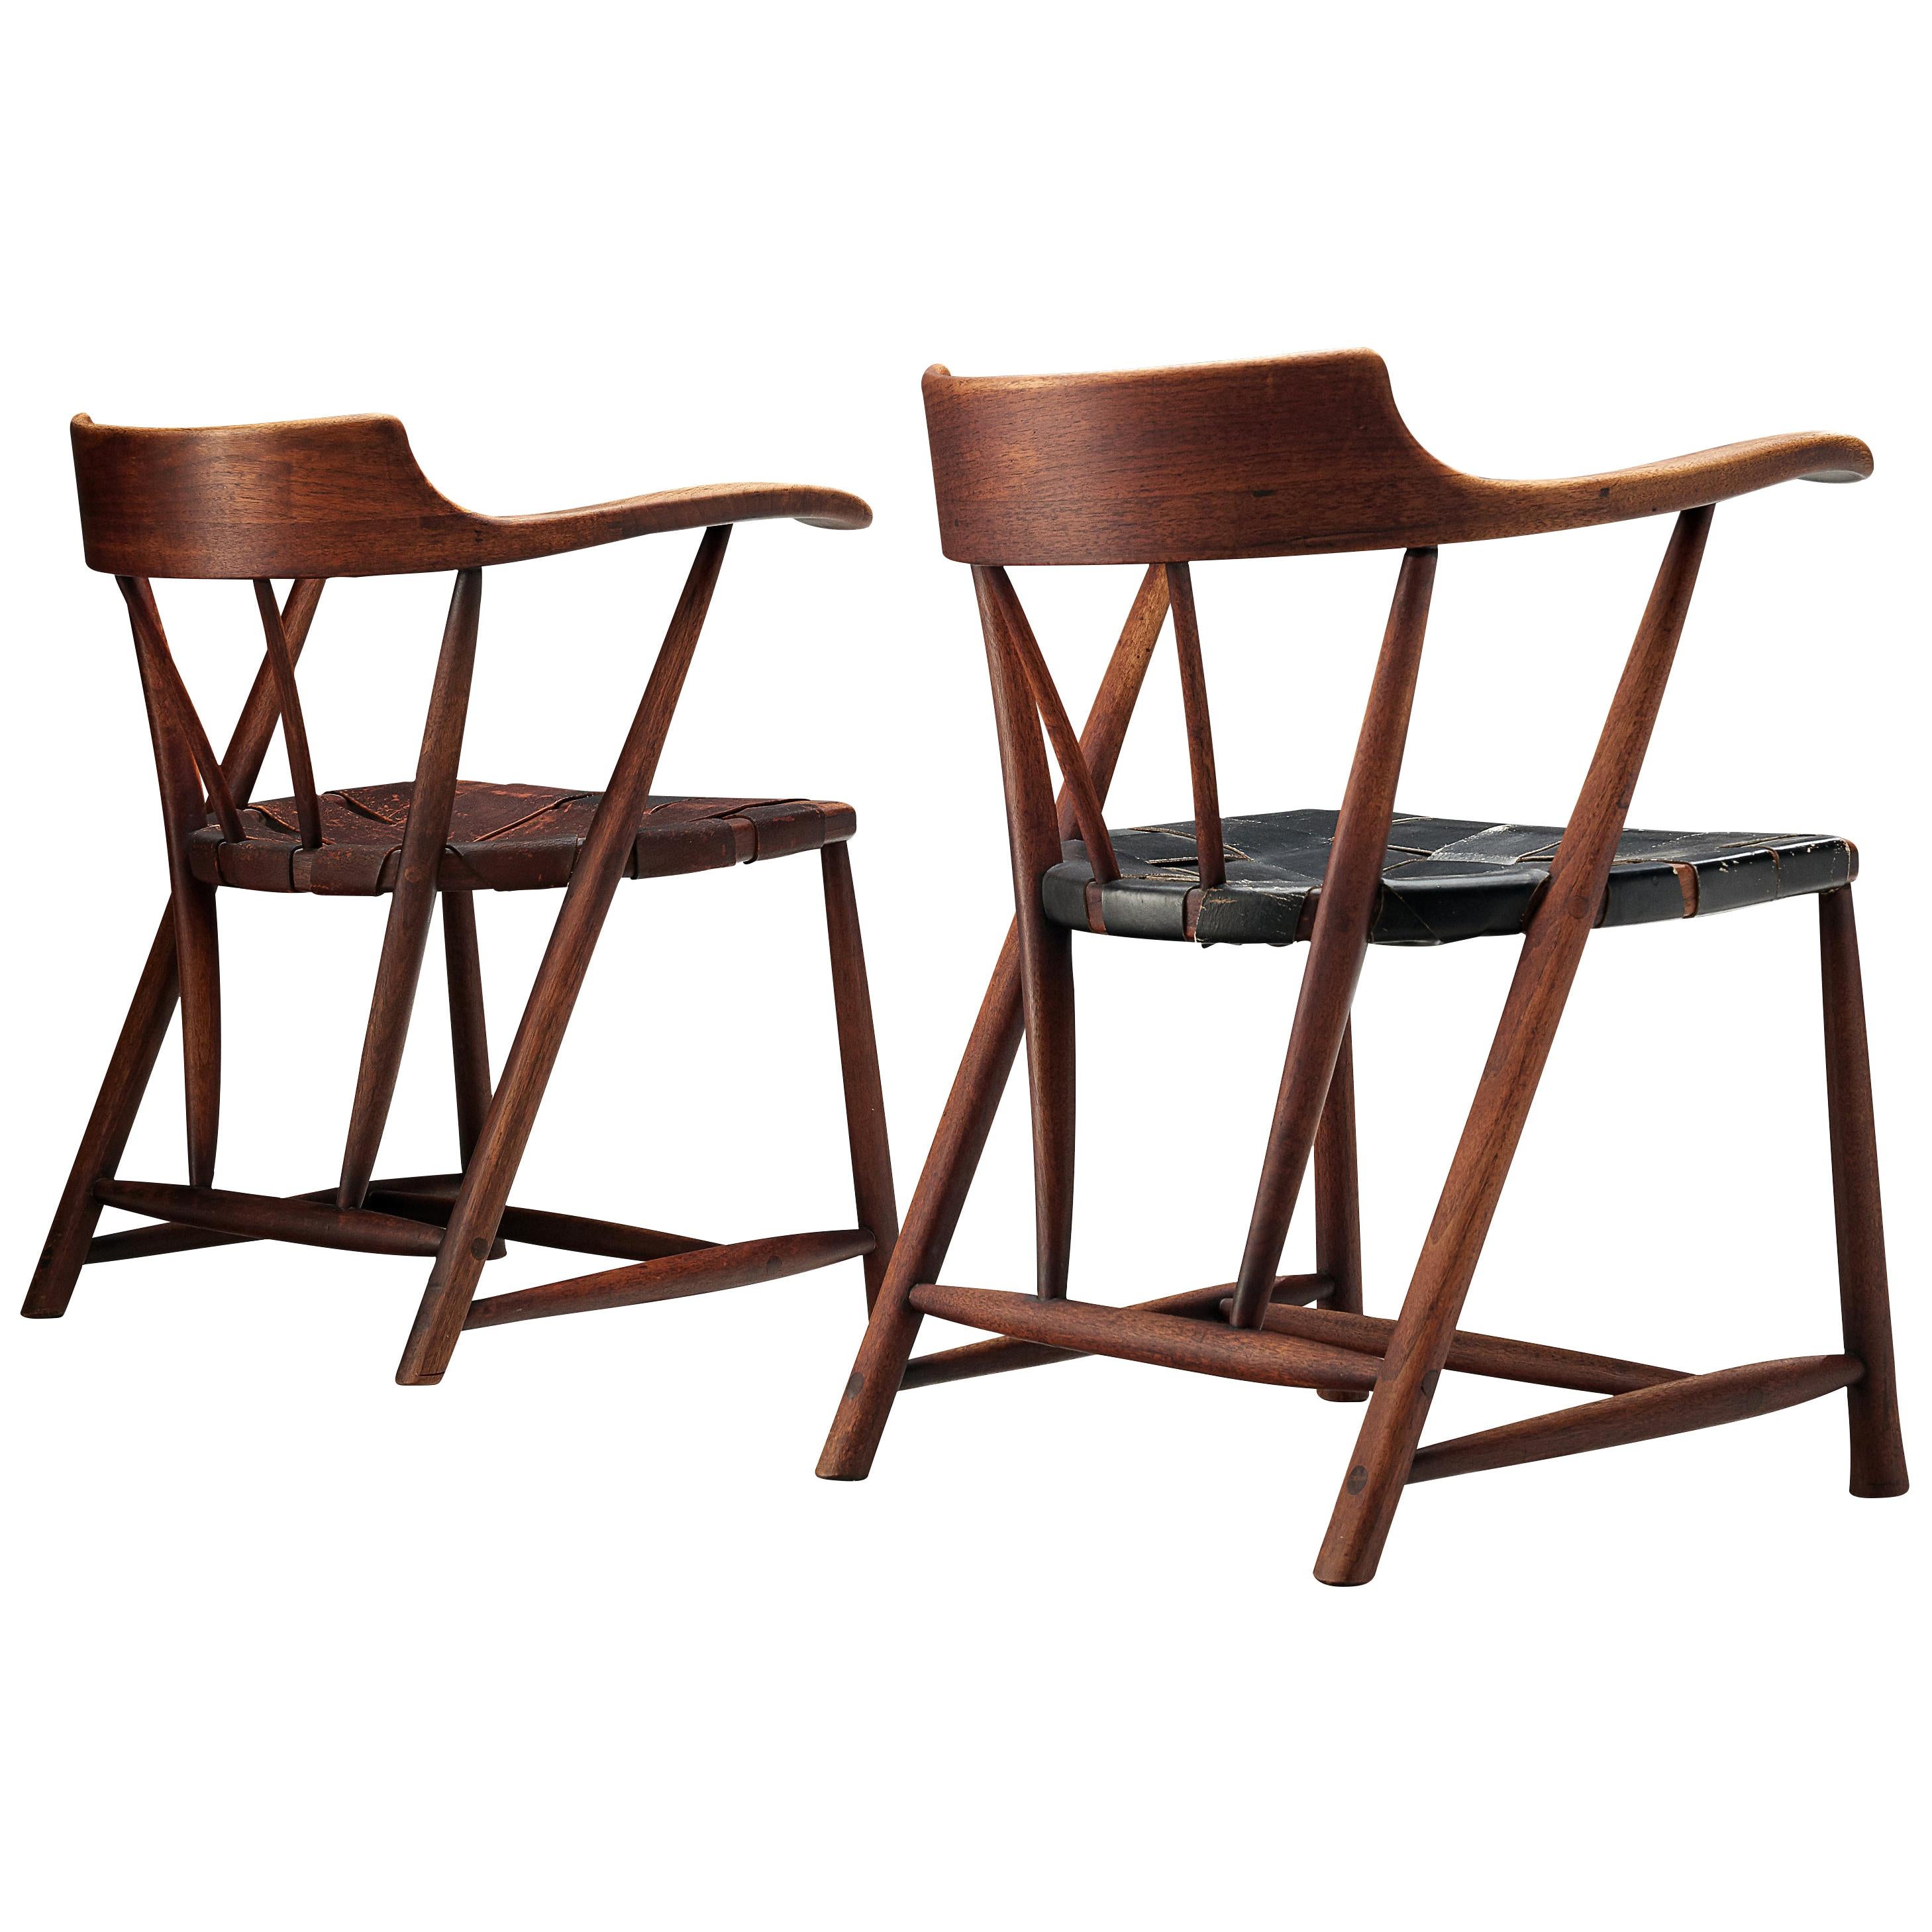 Early Wharton Esherick ‘Captain’s Chairs’ in American Walnut and Leather